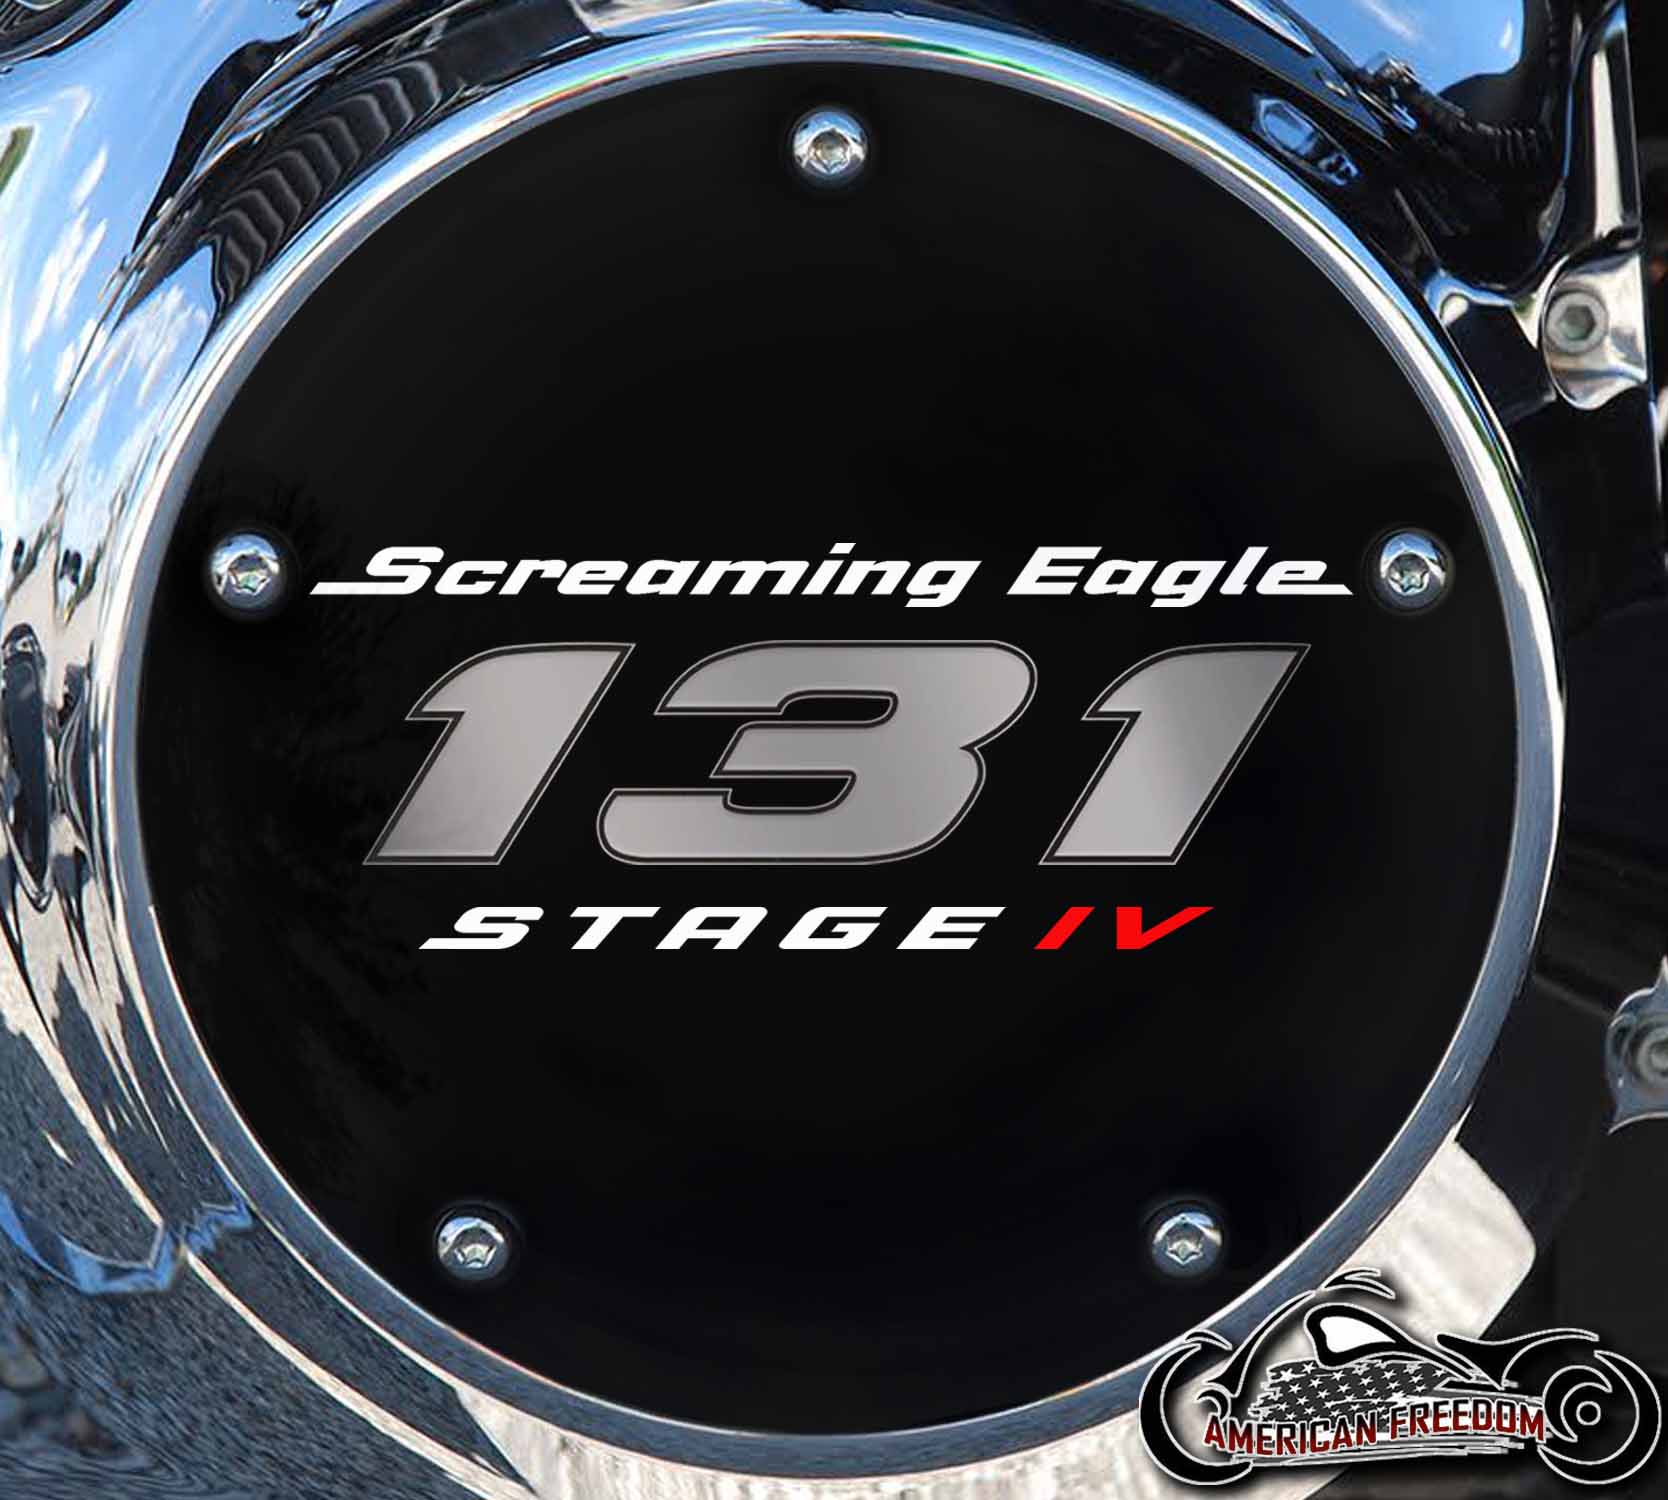 Screaming Eagle Stage IV 131 Derby Cover